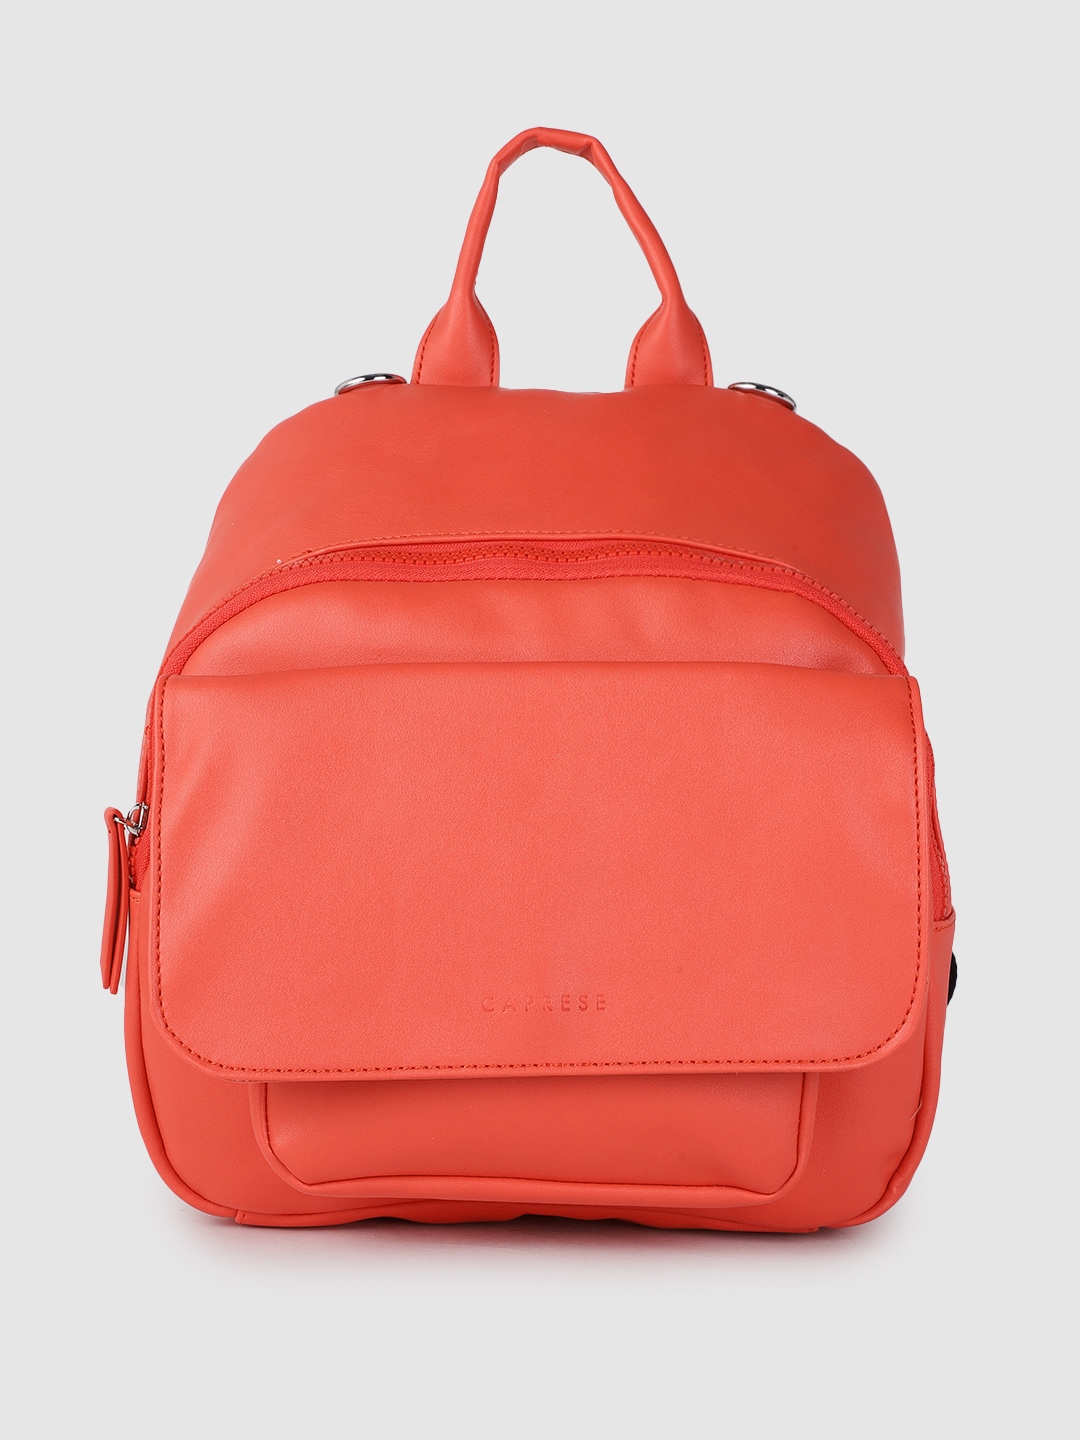 Caprese Women Red Backpack Price in India